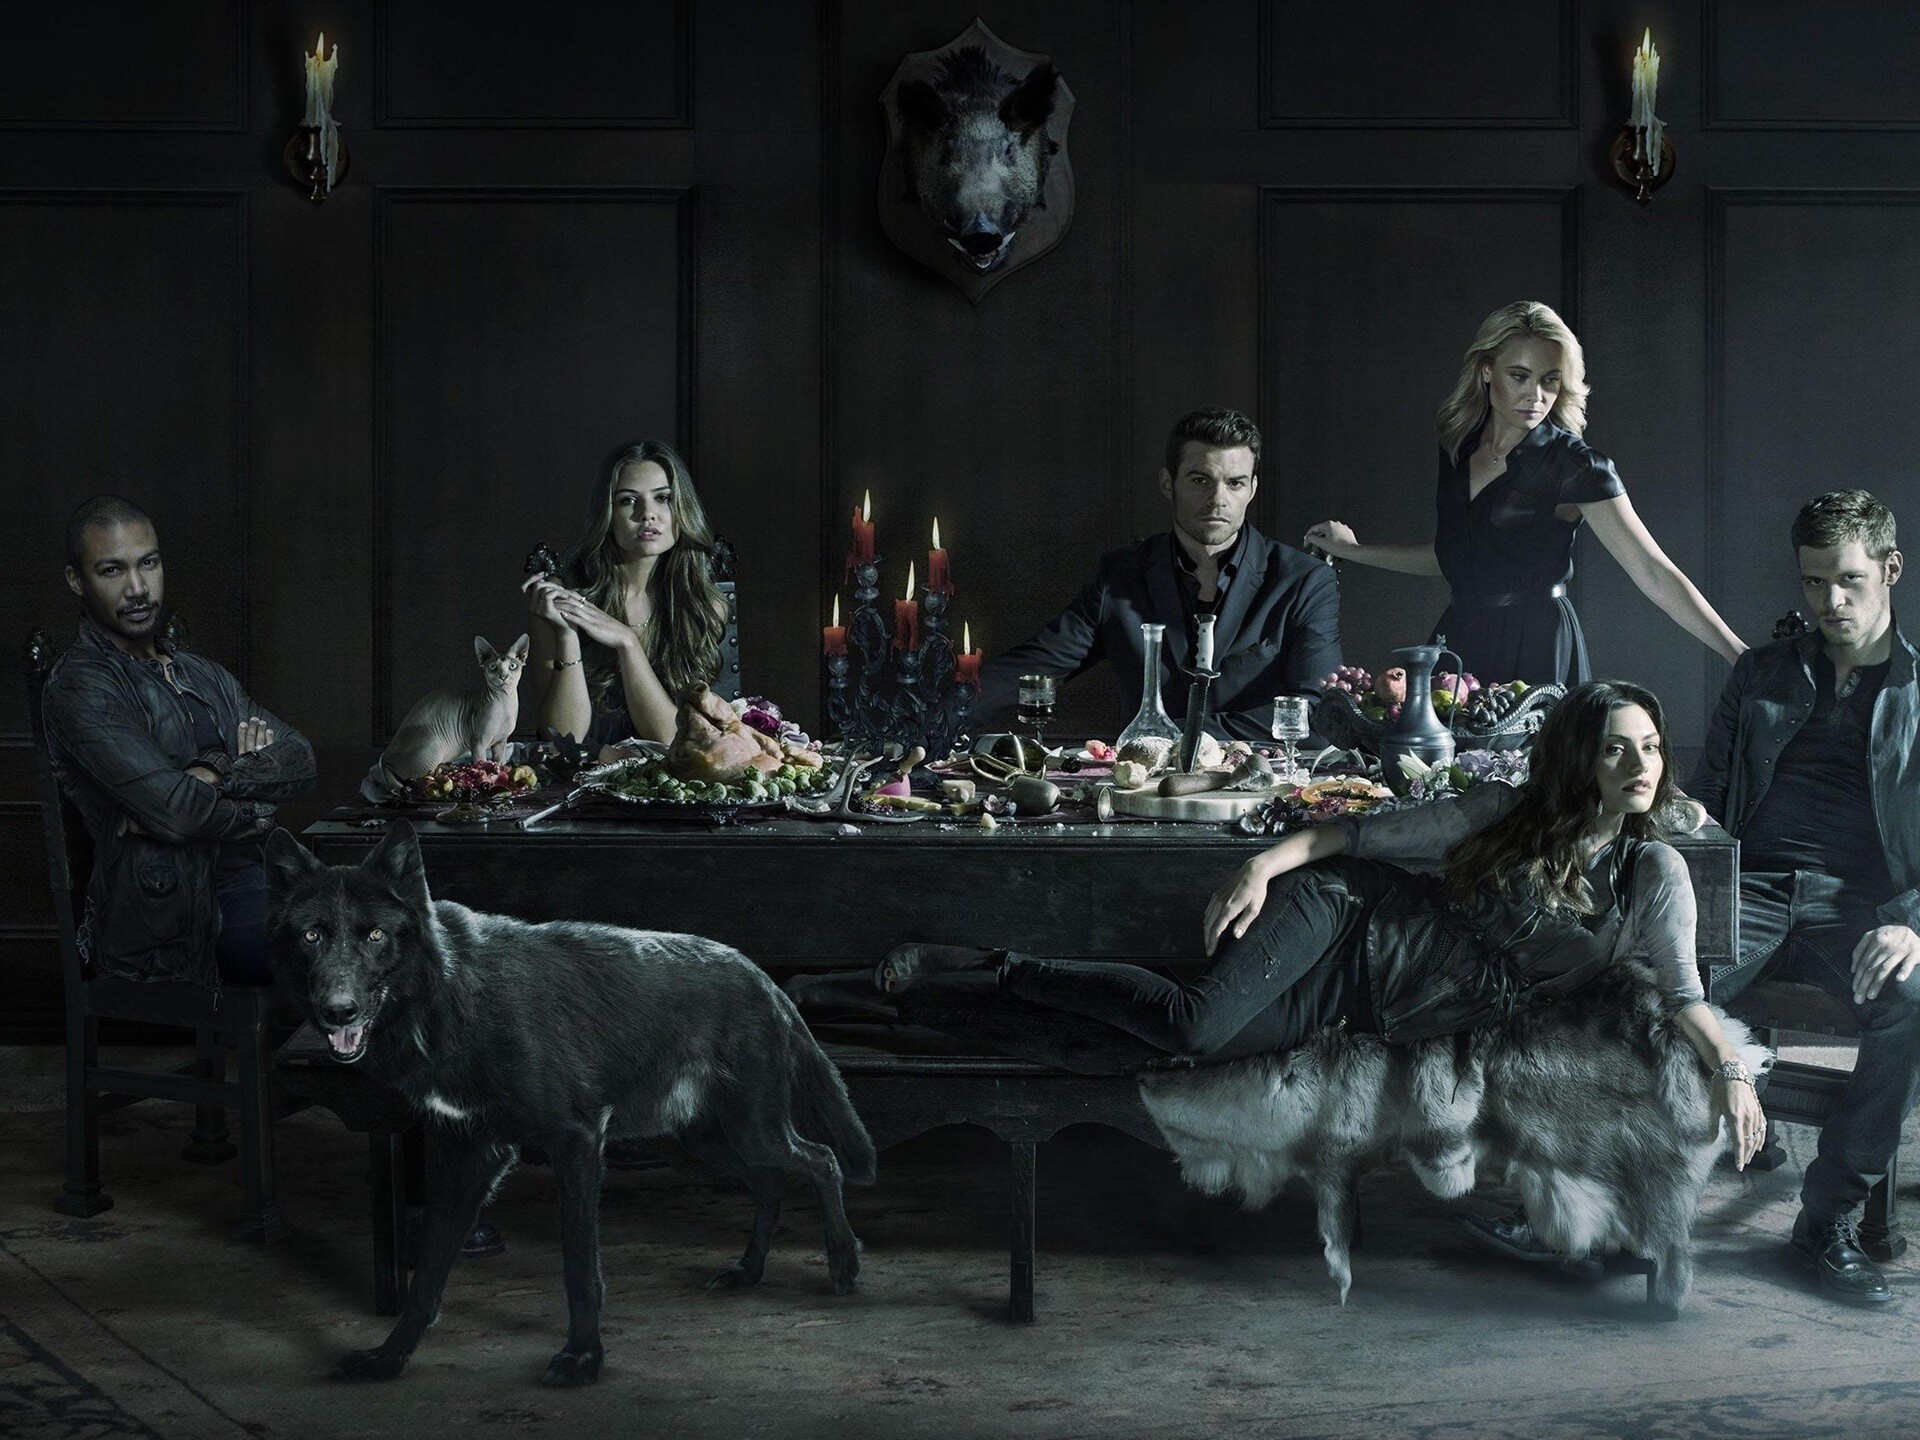 The Originals (TV Series): A spin-off of The Vampire Diaries, The Mikaelson family, The first vampires ever to exist. 1920x1440 HD Background.